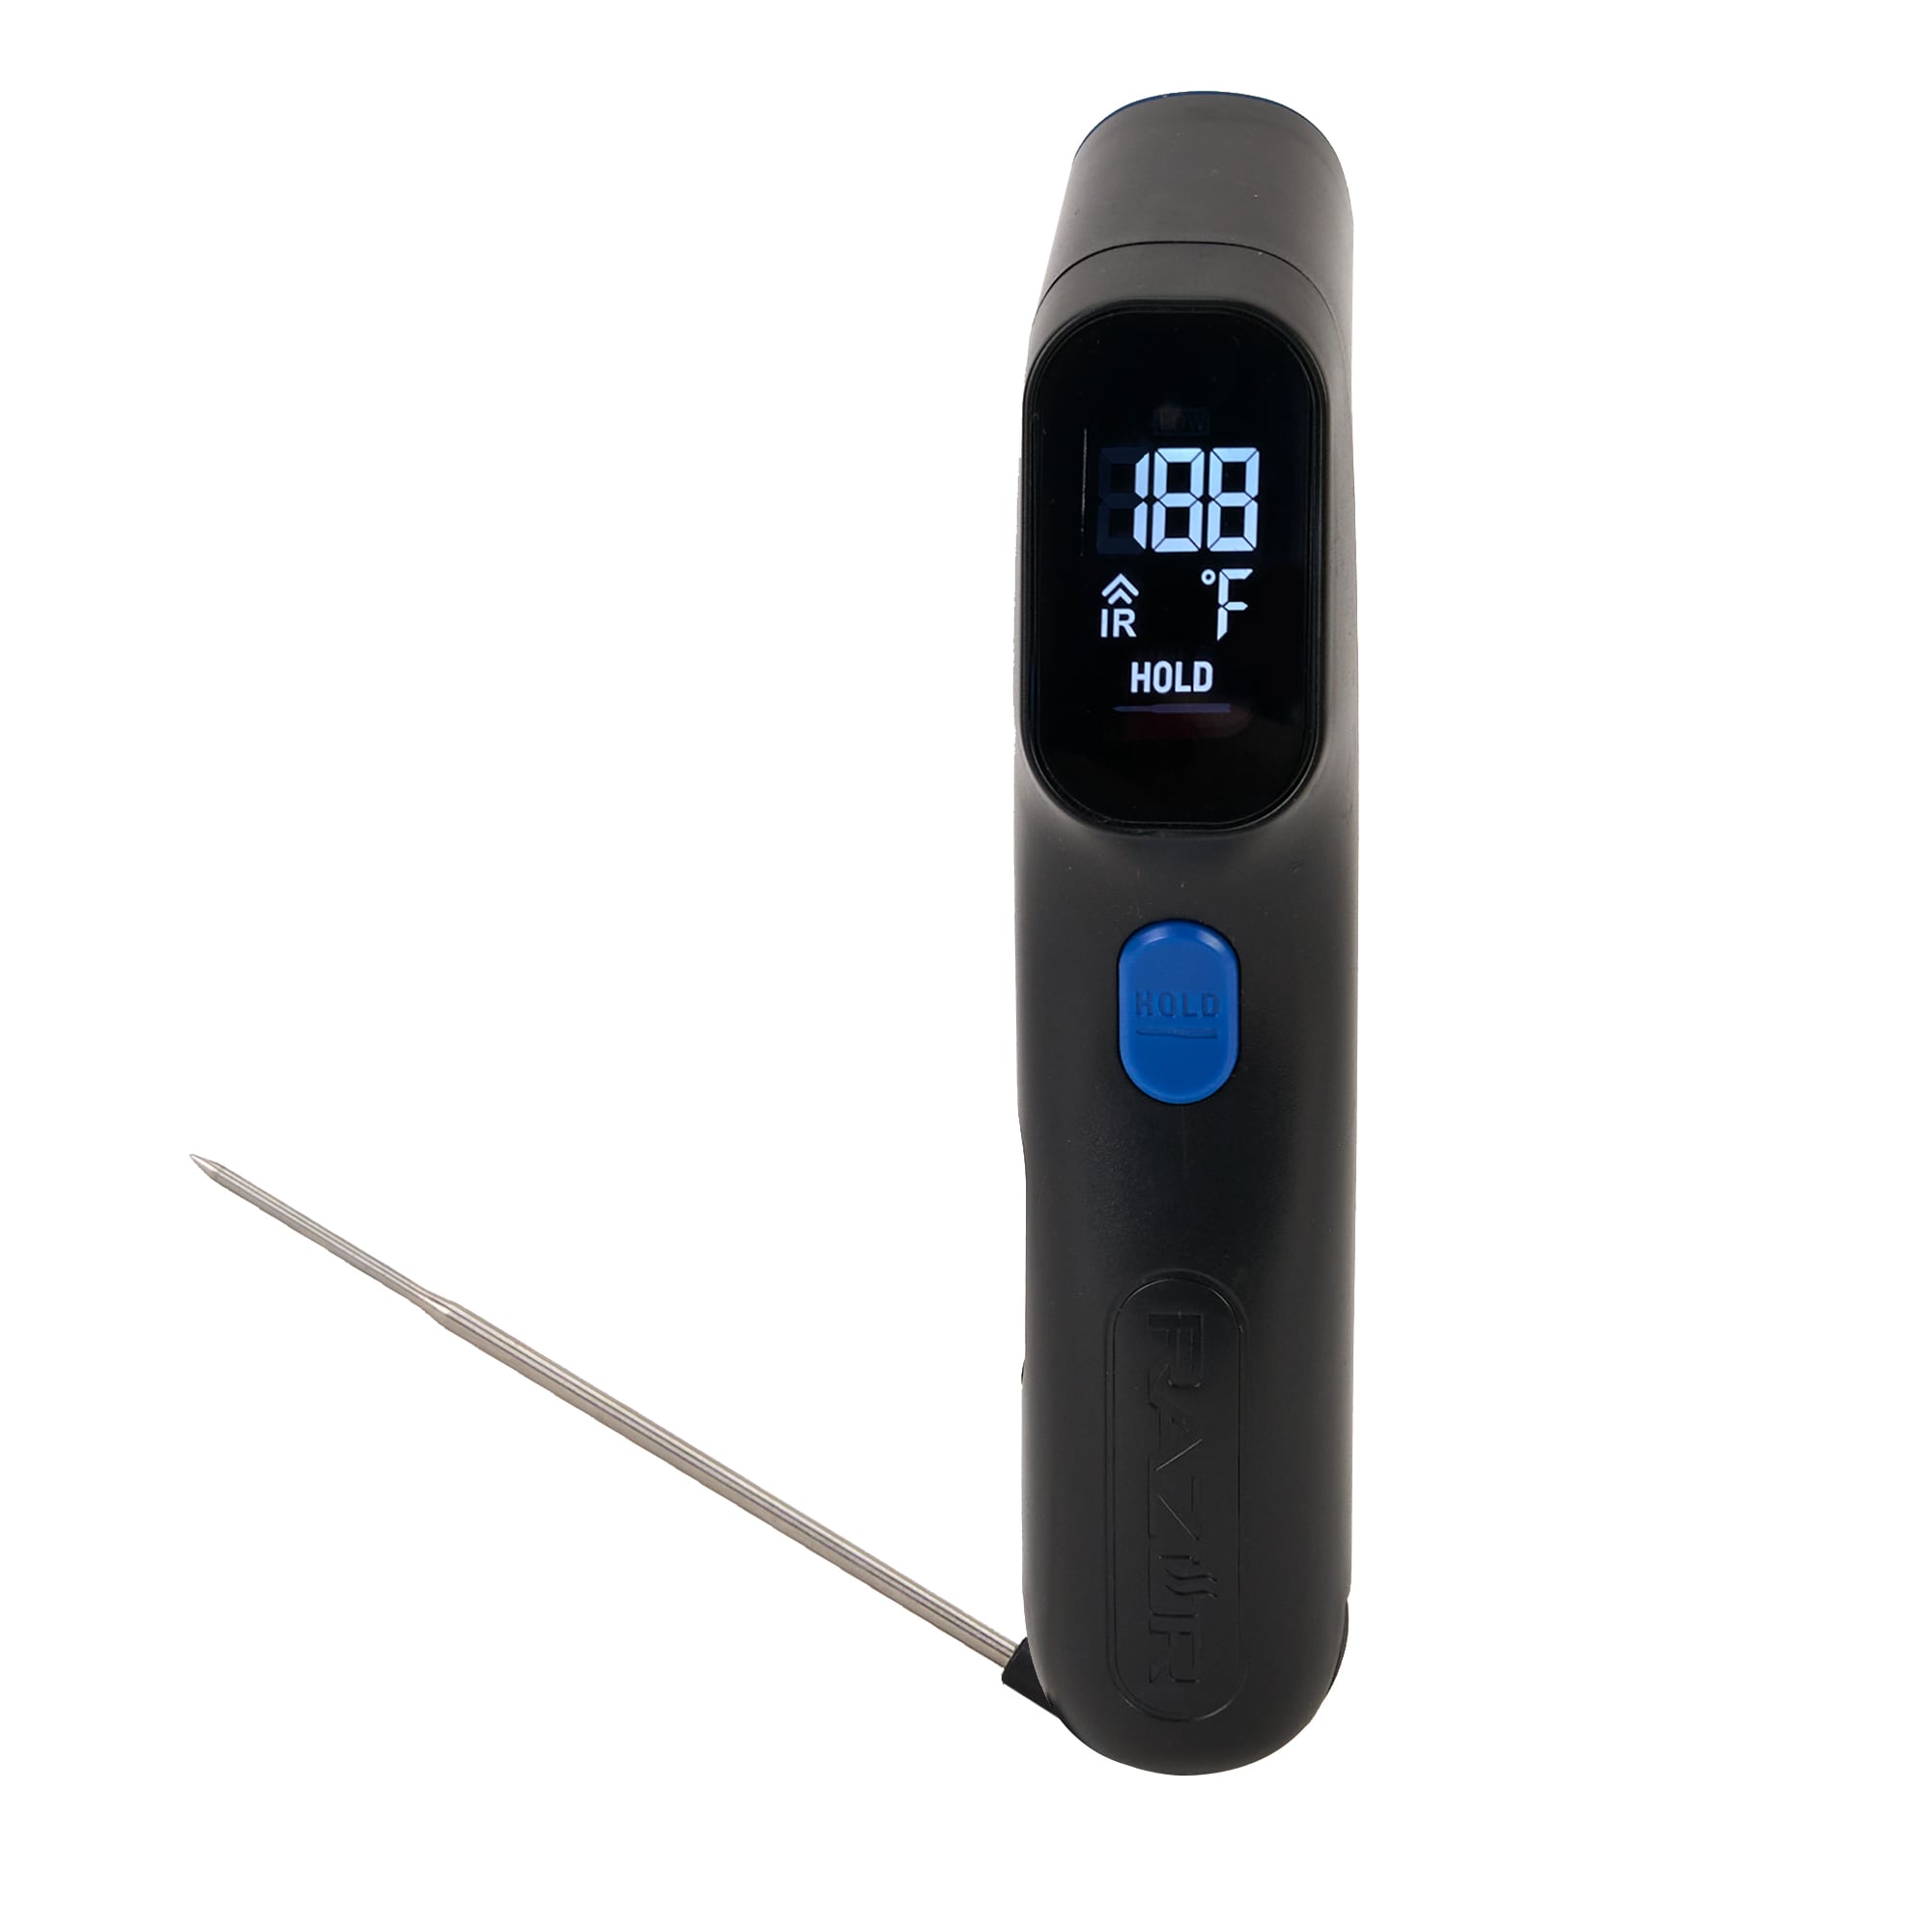 Honest Review Of The Blackstone Infrared Thermometer With Instant